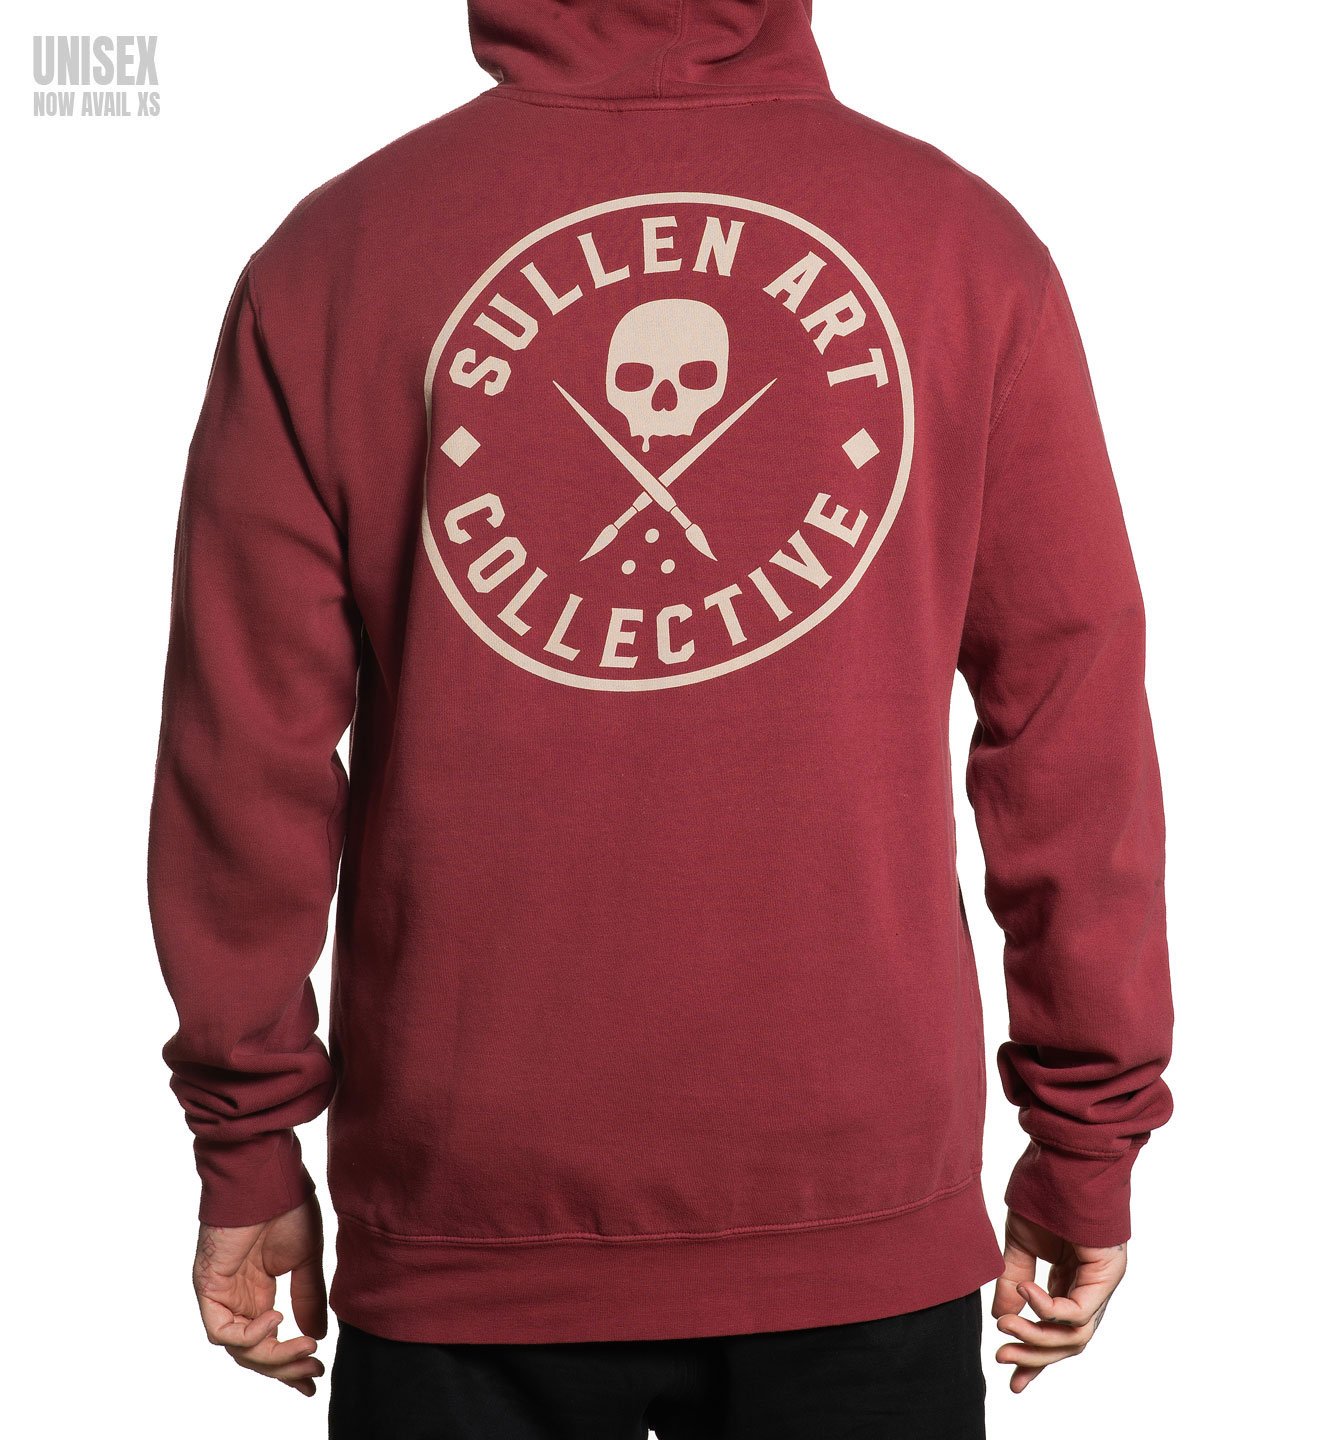 EVER PULLOVER ROSEWOOD - Sullen Clothing